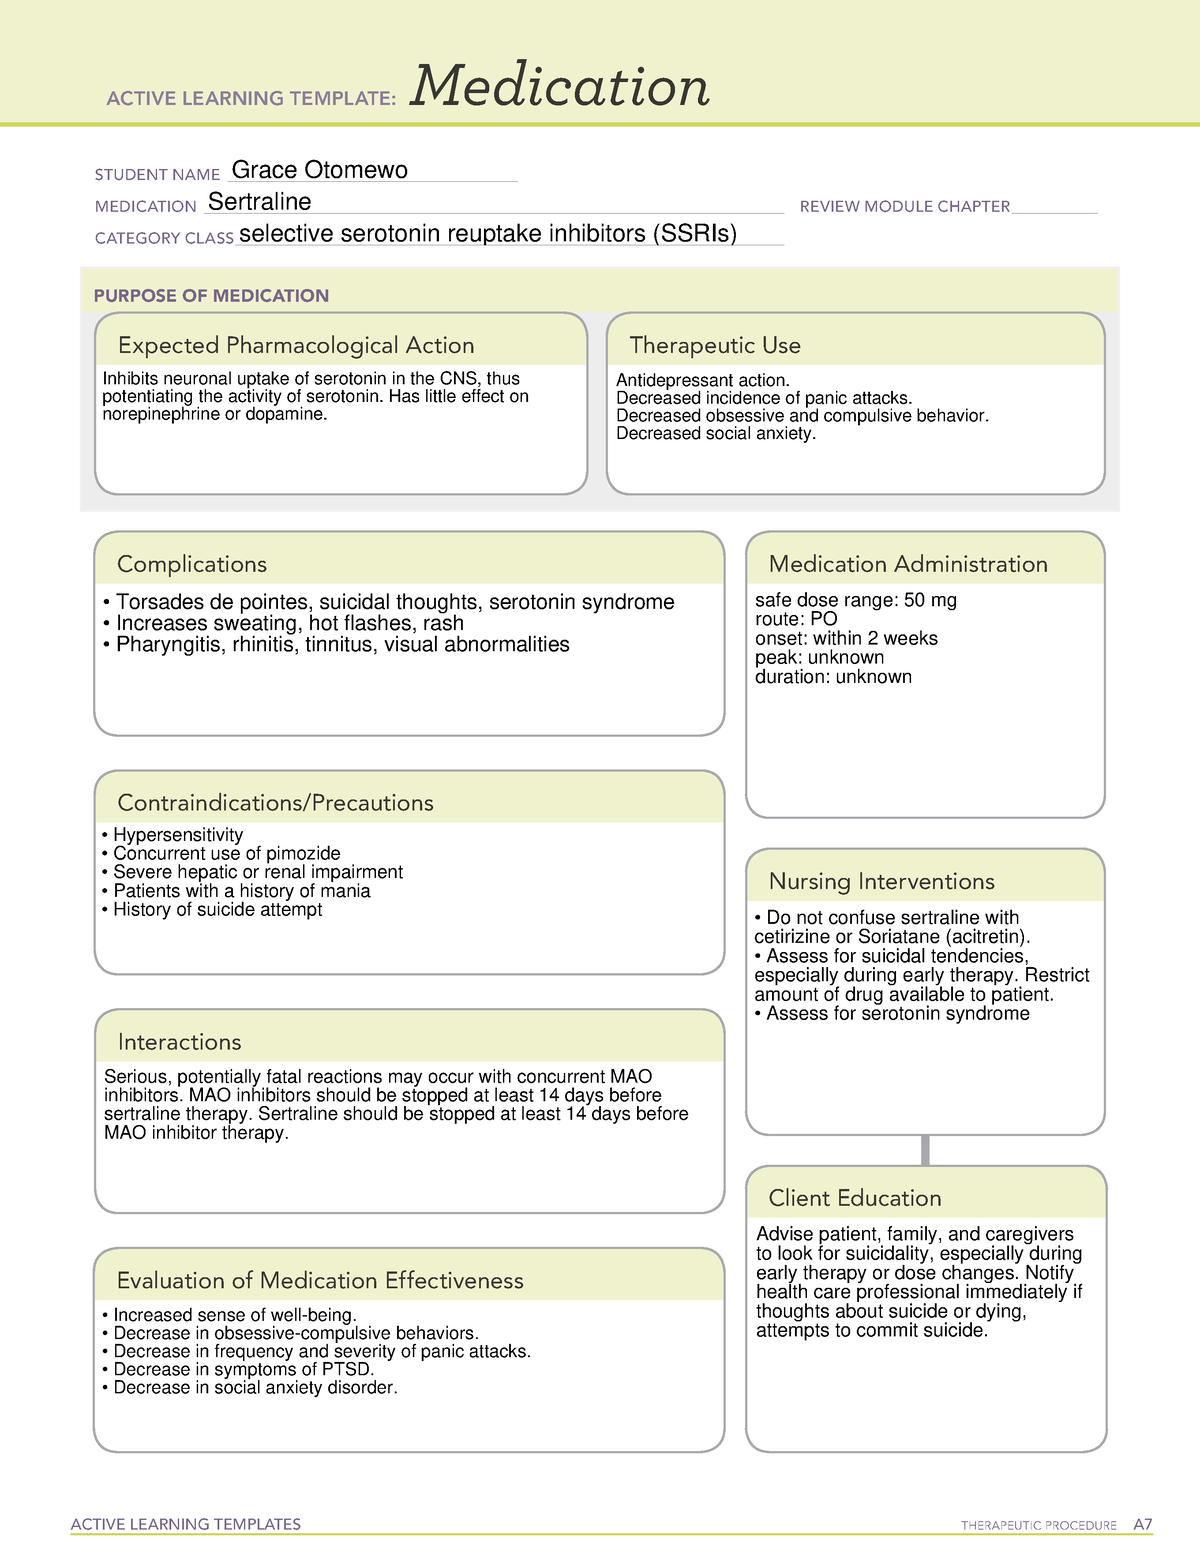 ATI Med Template blank ACTIVE LEARNING TEMPLATES THERAPEUTIC